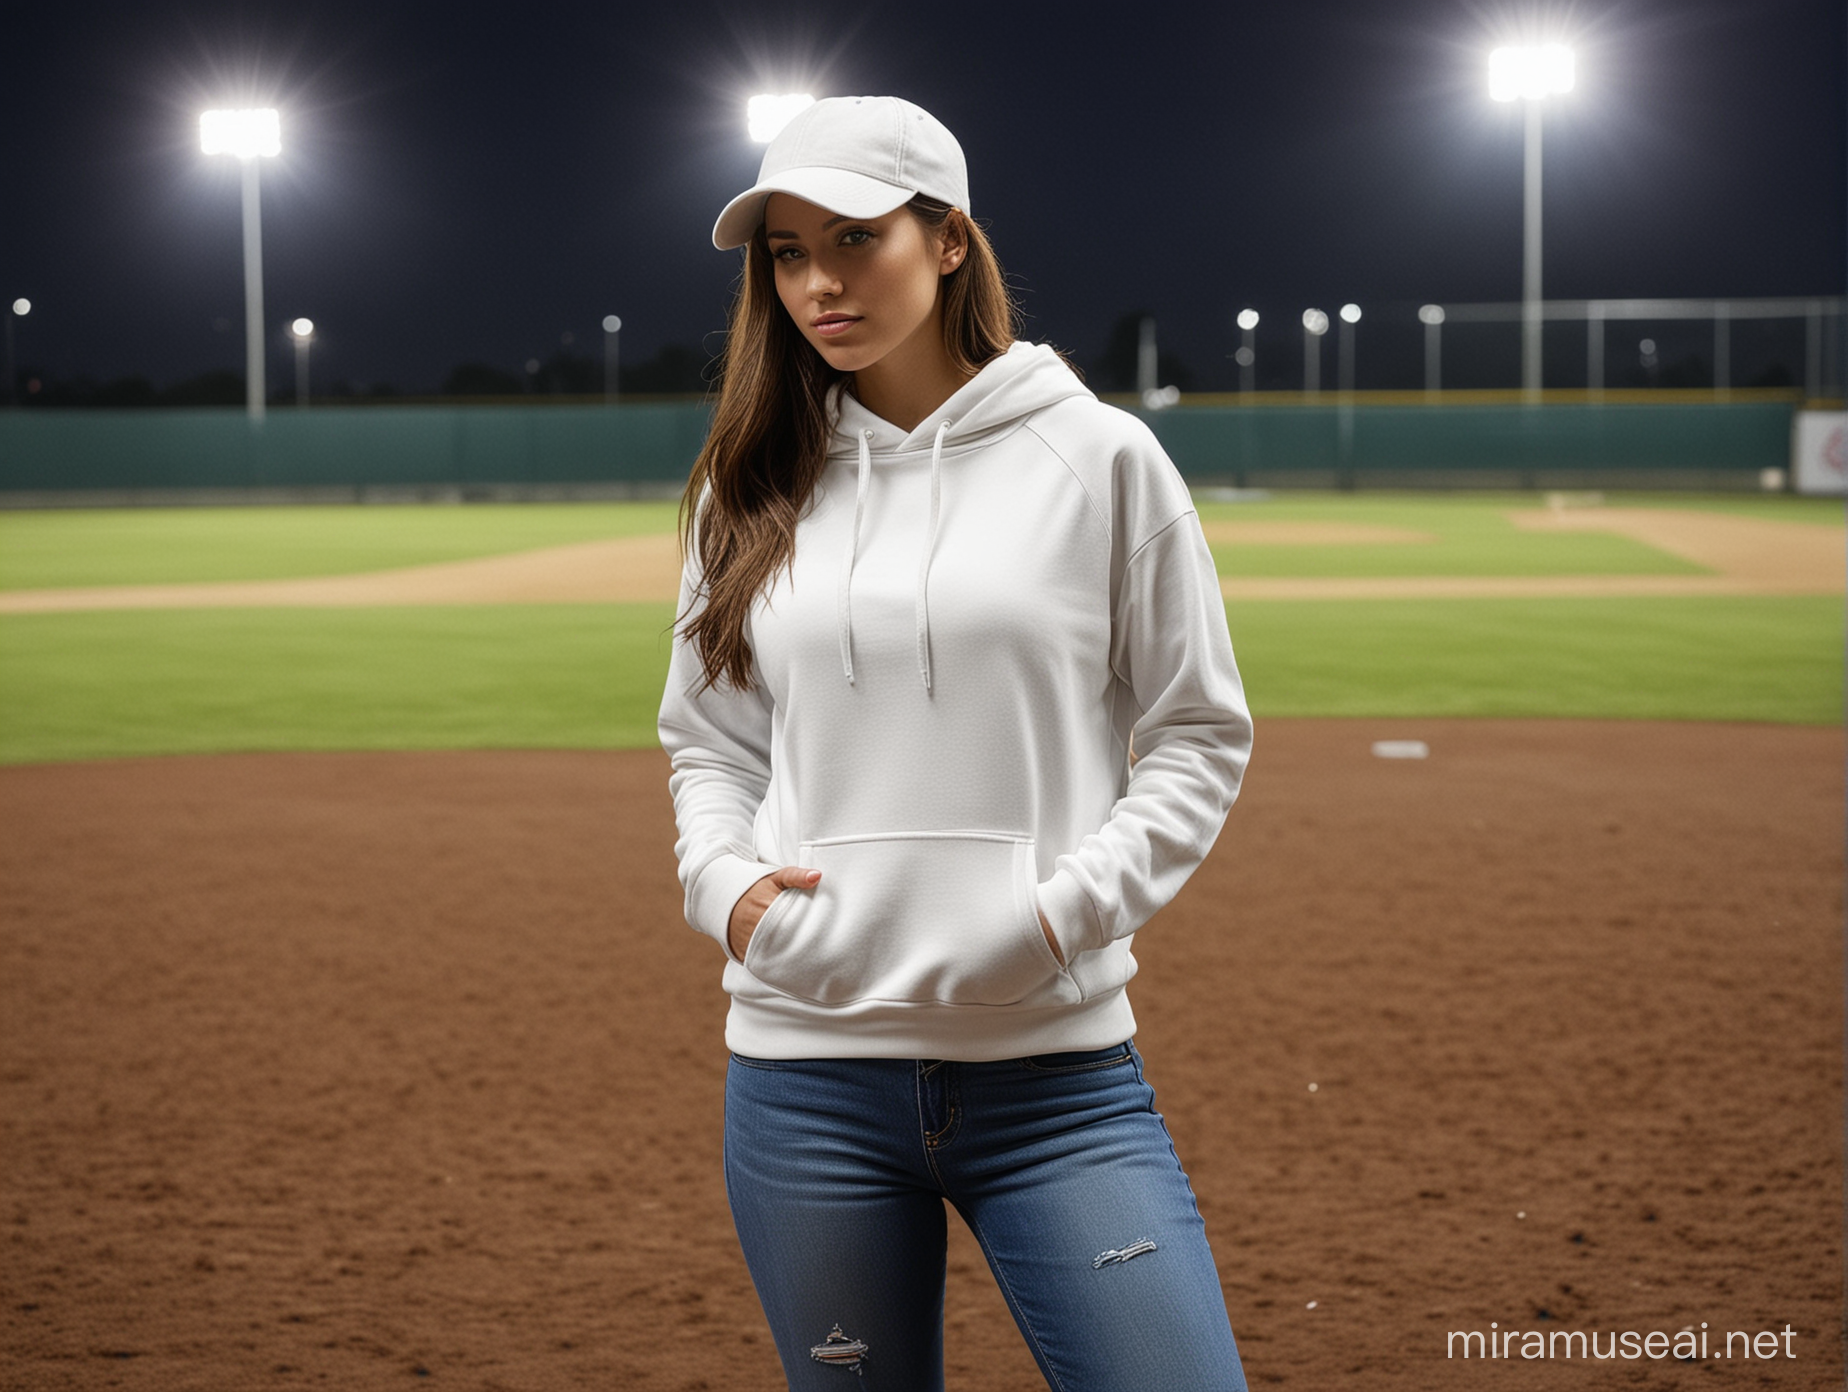 Create an image of a beautiful woman Wearing a blank white hoodie and blue jeans and a white baseball cap She is outside on a baseball field during the night with the stadium Lights on.